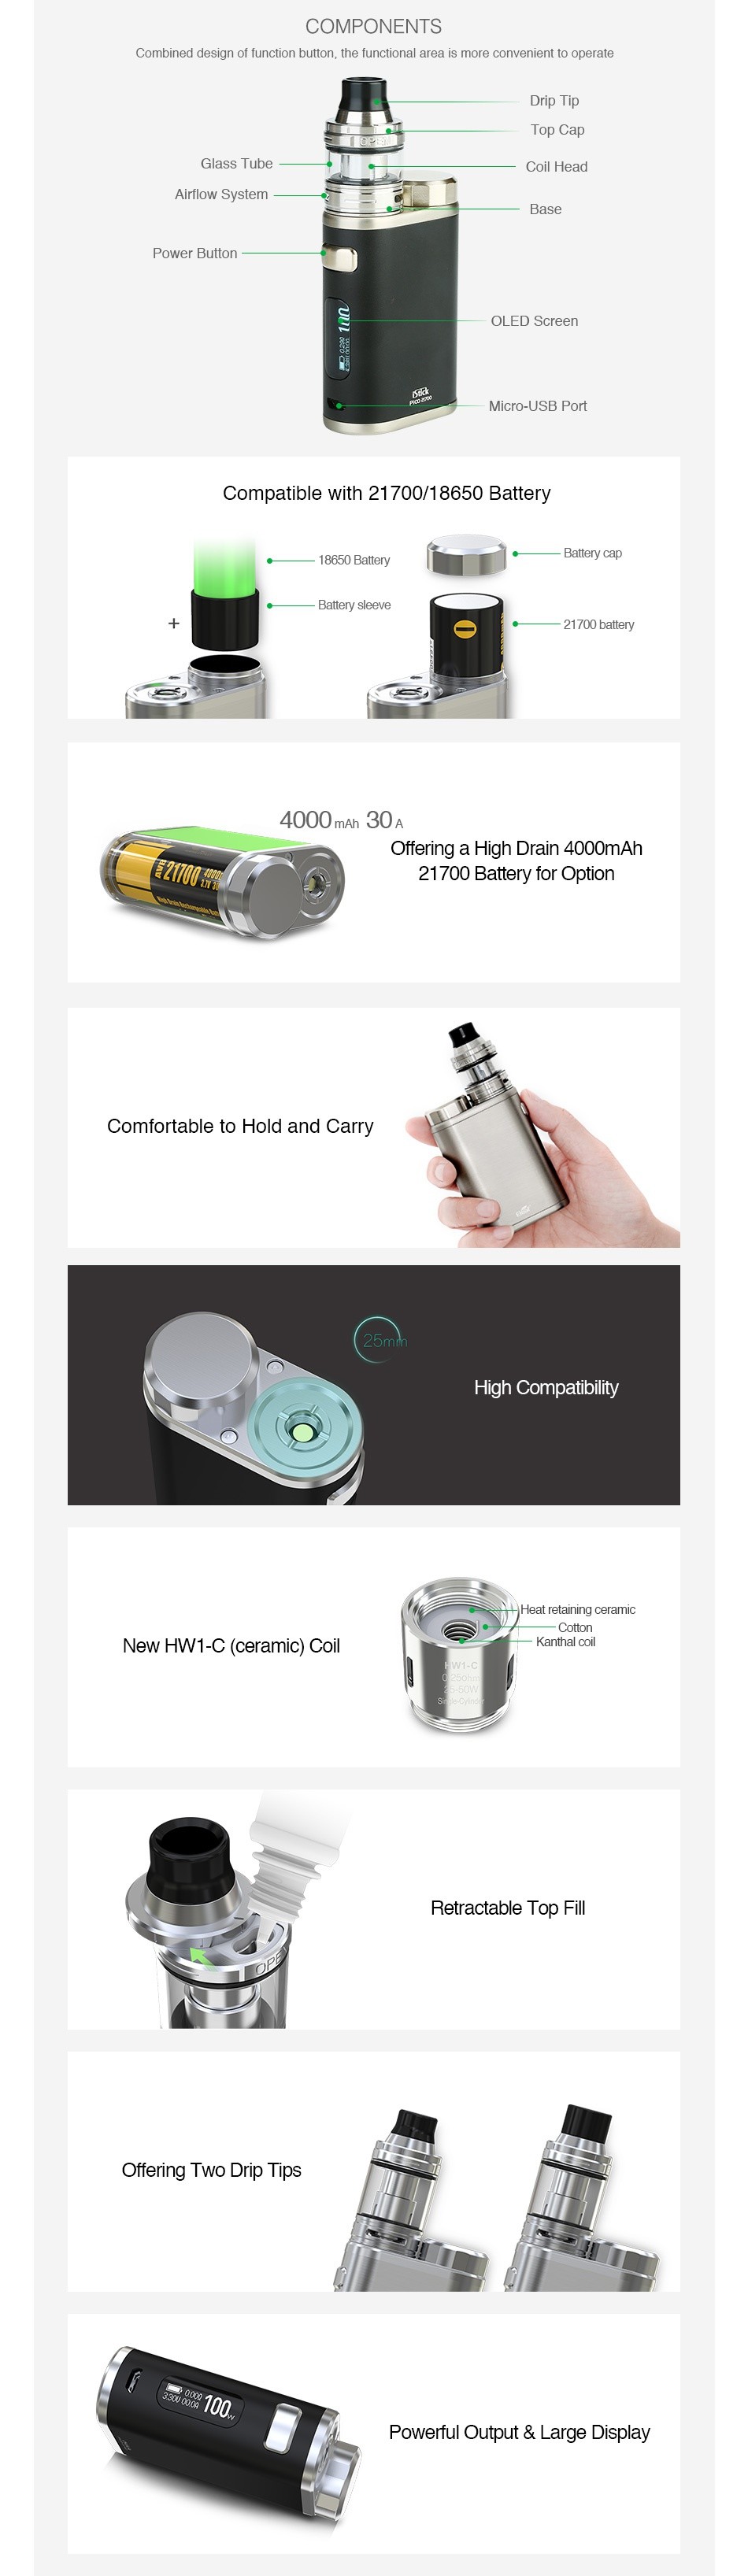 Eleaf iStick Pico 21700 100W with Ello TC Kit 4000mAh COMPONENTS    L   bullon Ihe lurchoHl aIH  Is rmore corRell le sihlHlH Top Cap Glass Tubo Coil Hesd How systern OLED SCrC Micro USB Port Compatible with 21700 18650 Battery Bacry sovc   4000mh30A Ofenng a High Drain 4o0omAh 21700 Battery for Optic Comfortable to Hold and carry High Compatibility HEat retaining ceramic New HW1 C ceramic Coil p Offering Two Drip Tips Powerful Output Large Display